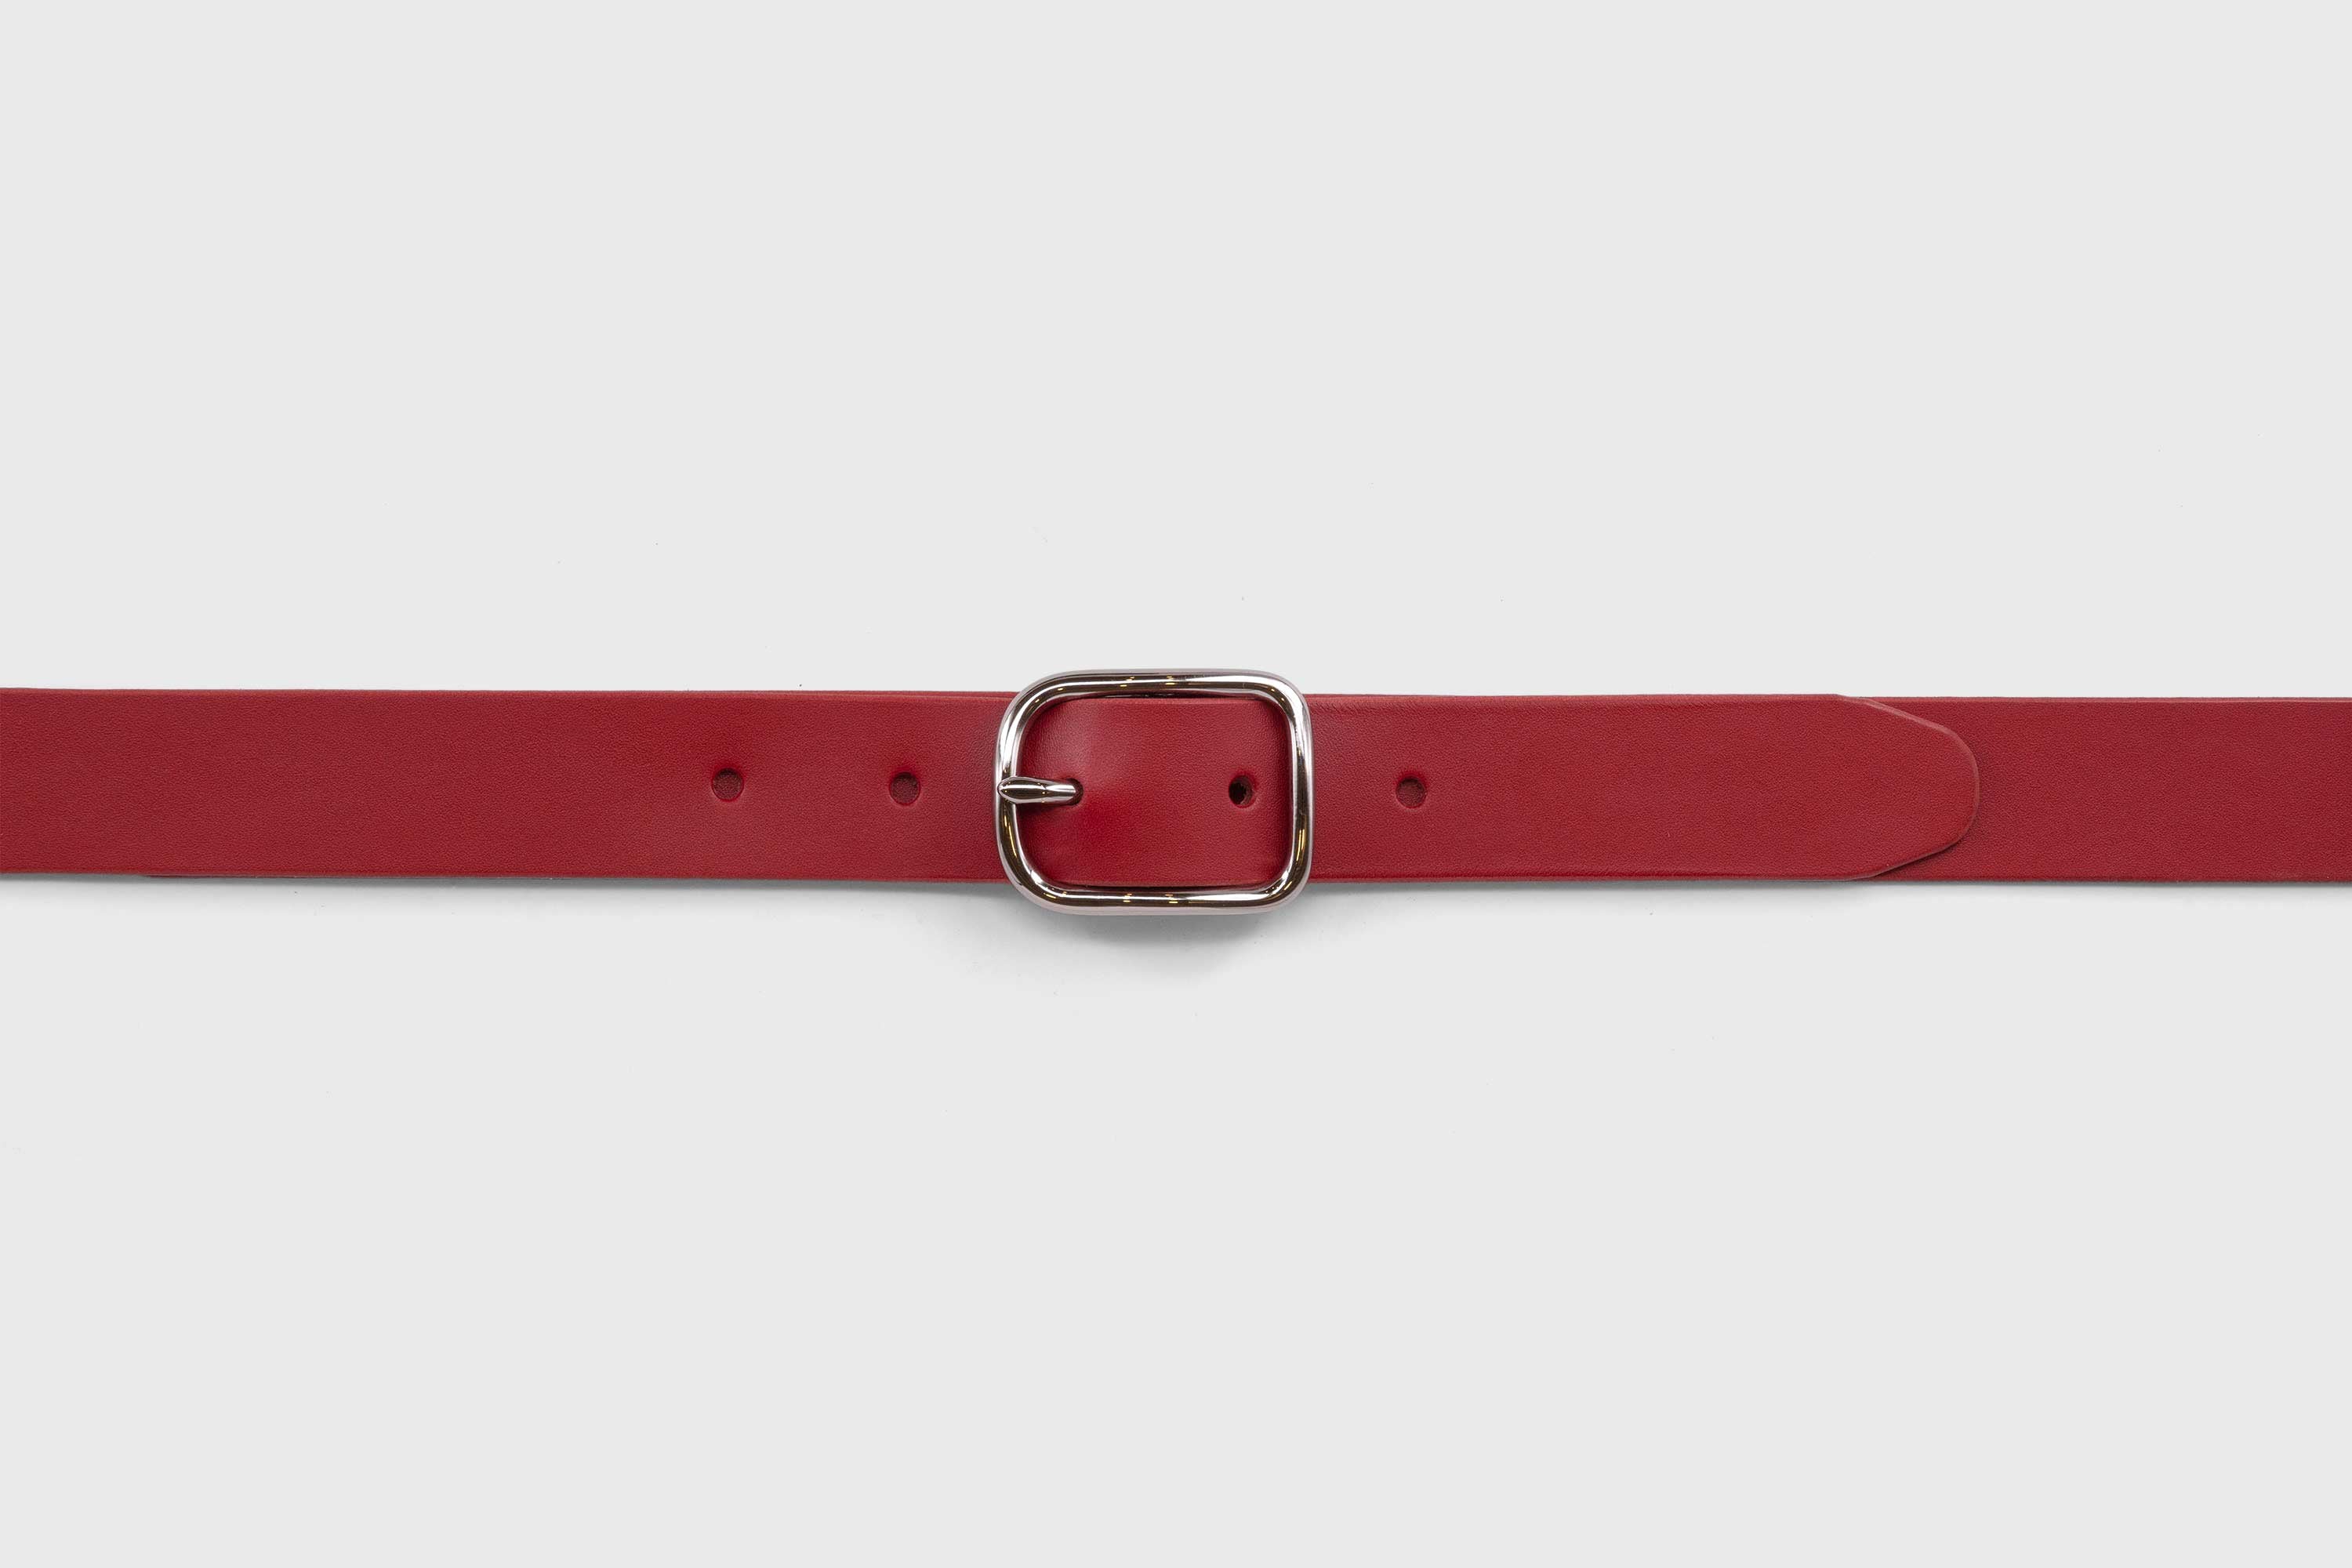 Leather Belt Small Rio Nickel PVD Coated Buckle Red vegetable tanned full grain leather Minimalist Design Atelier Madre Manuel Dreesmann Barcelona